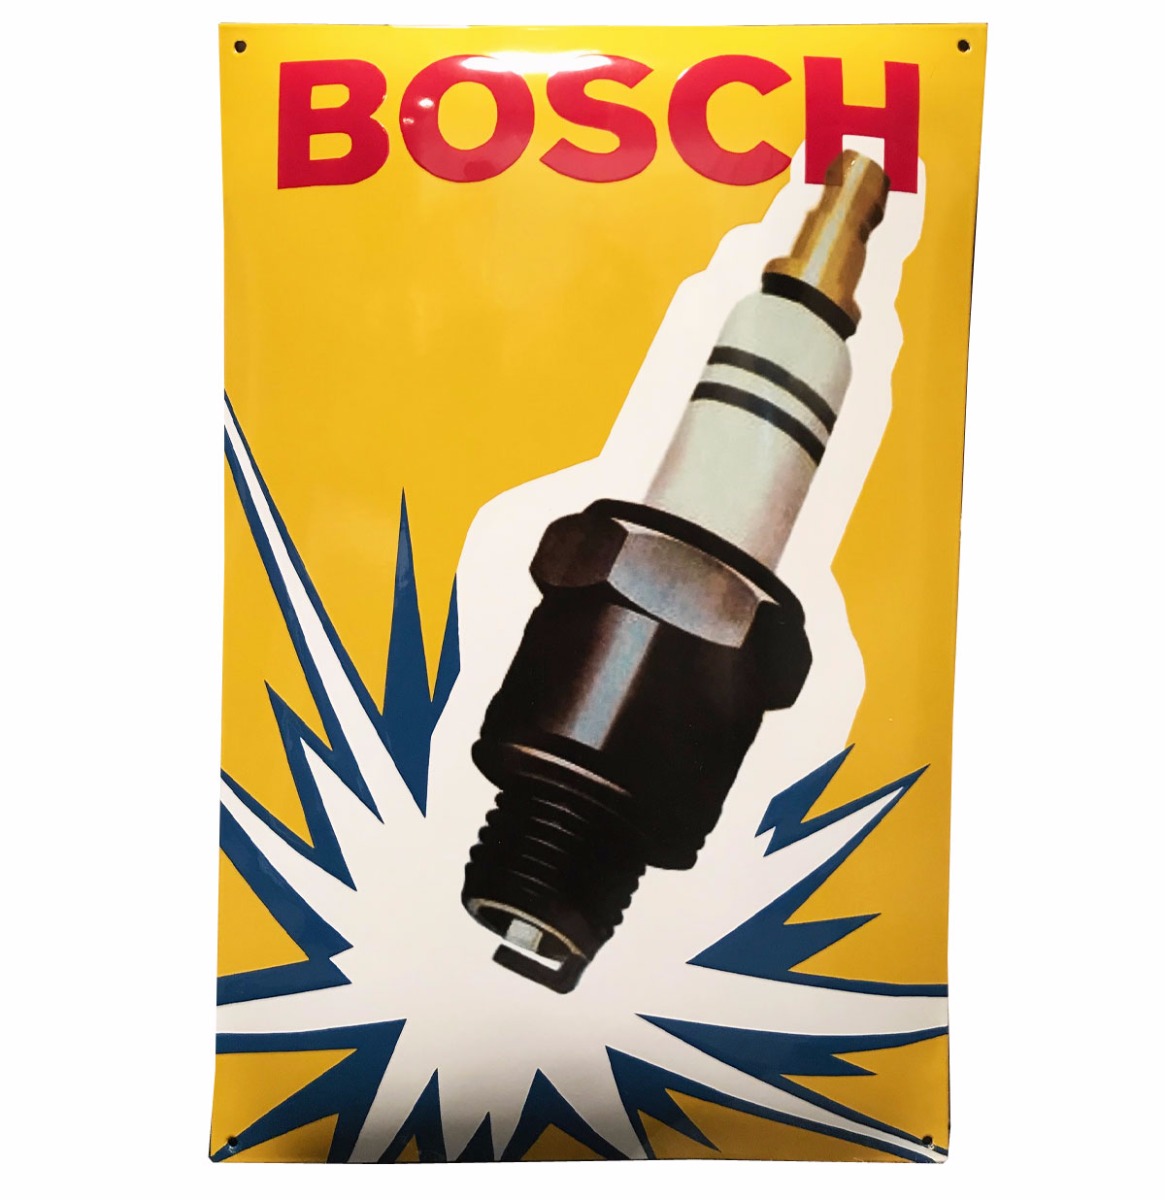 Fiftiesstore Bosch Spark Plug Bougies Emaille Bord 60 x 40 cm